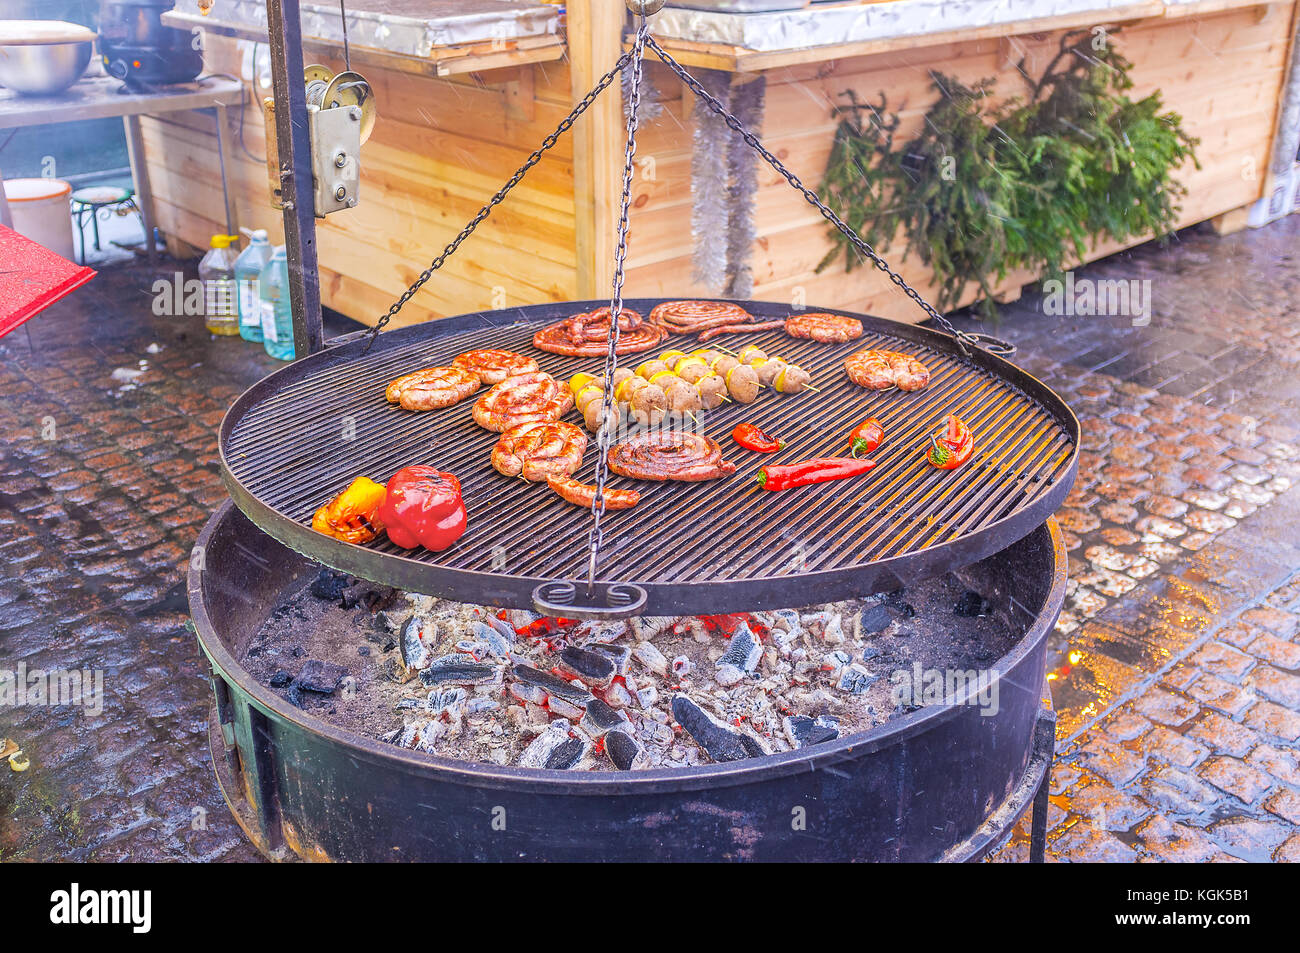 The cold winter evening is the best time to taste hot grilled sausages and vegetables with mulled wine at the Christmas Market in Kiev, Ukraine Stock Photo